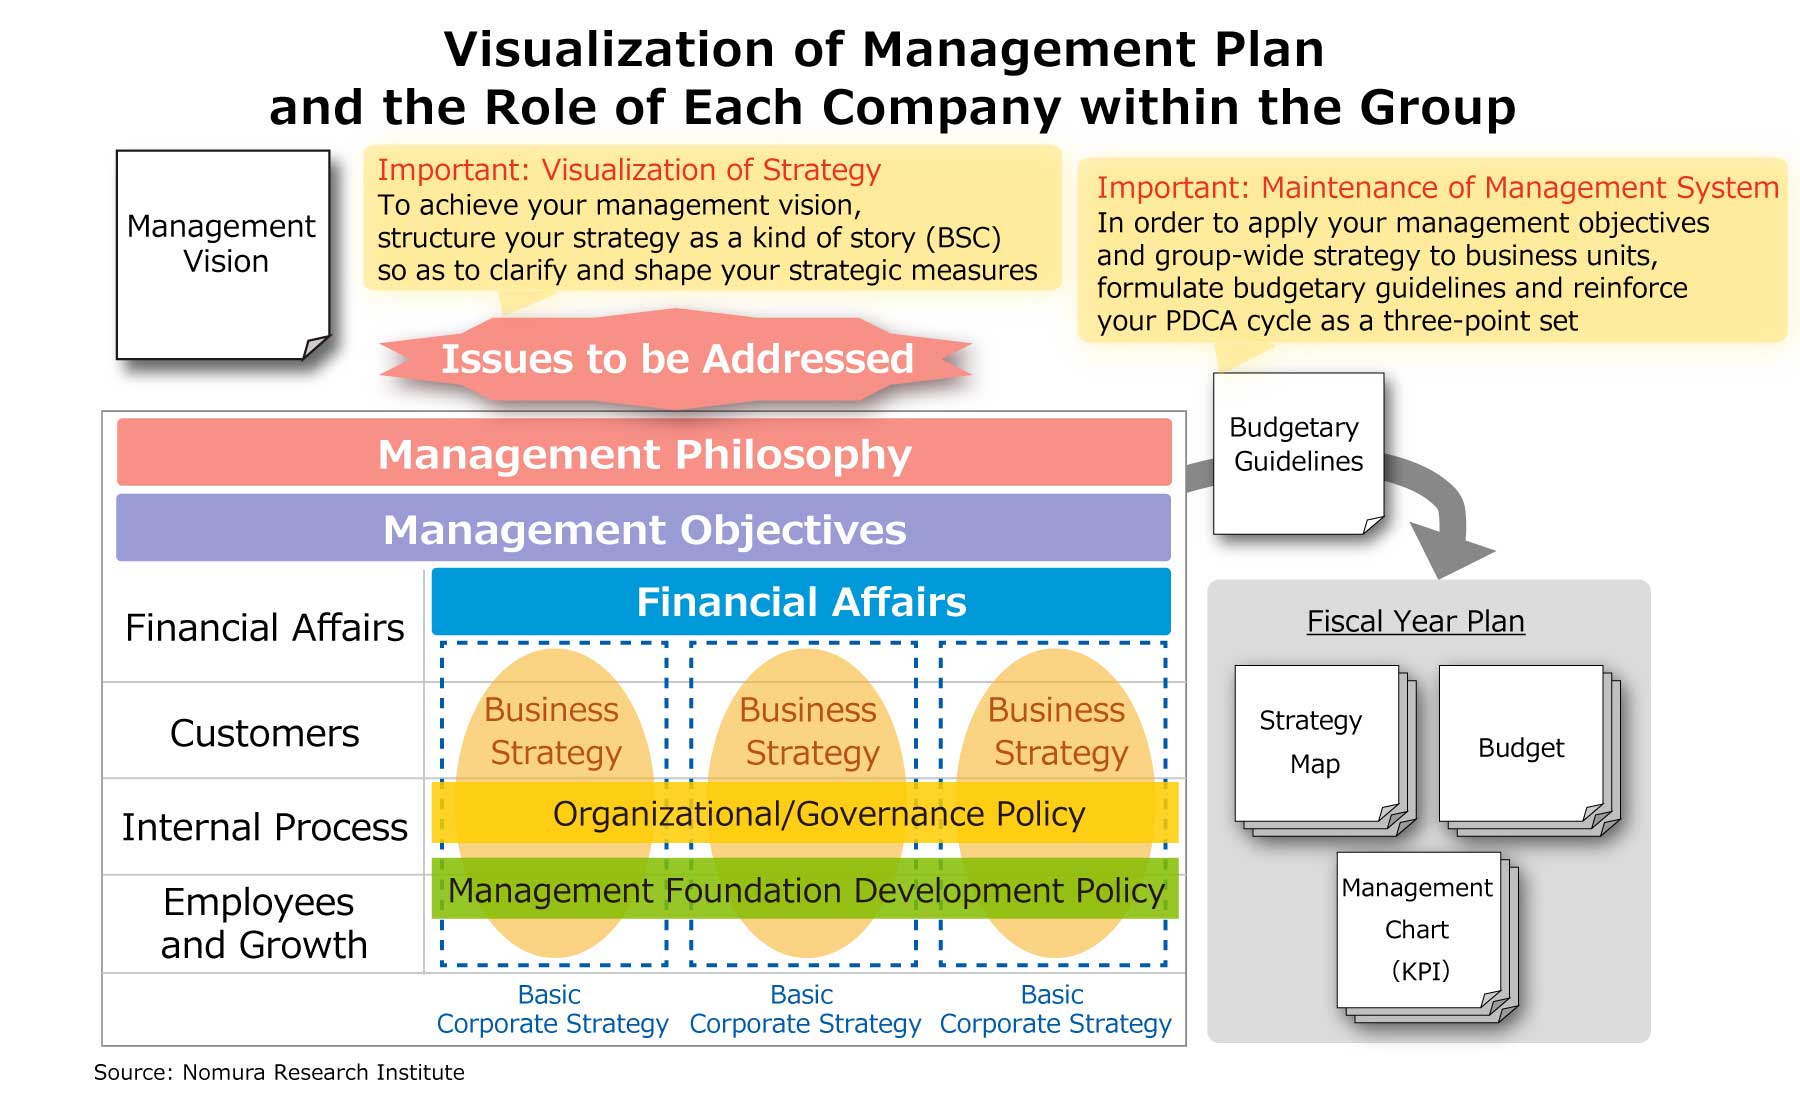 Visualization of Management Plan and the Role of Each Company within the Group